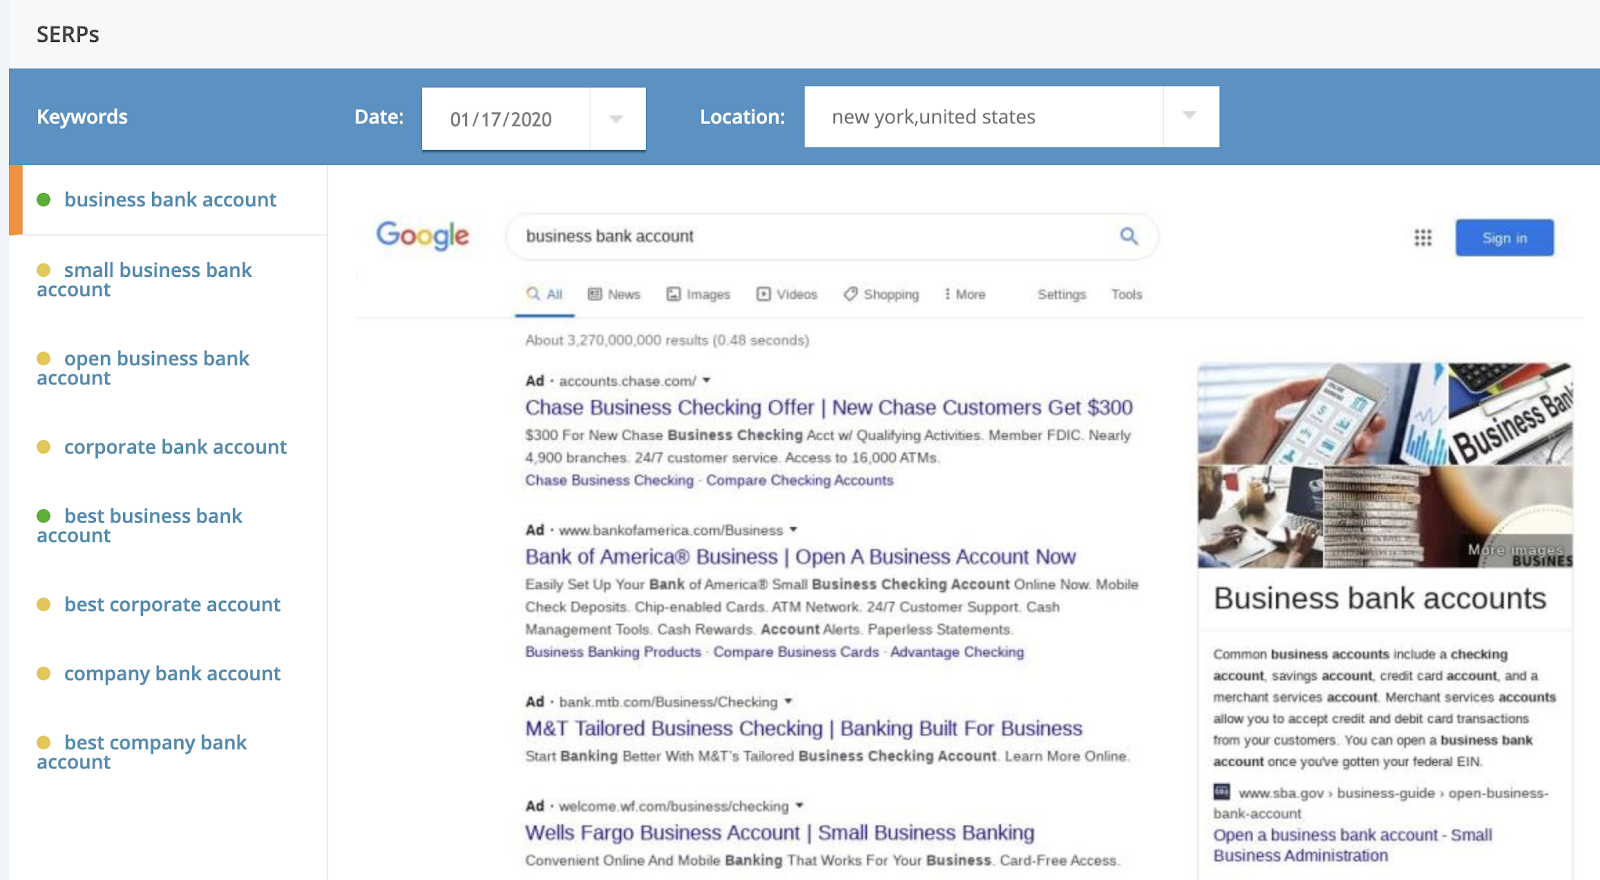 Chase is doing really well in the SERPs for "business bank account".